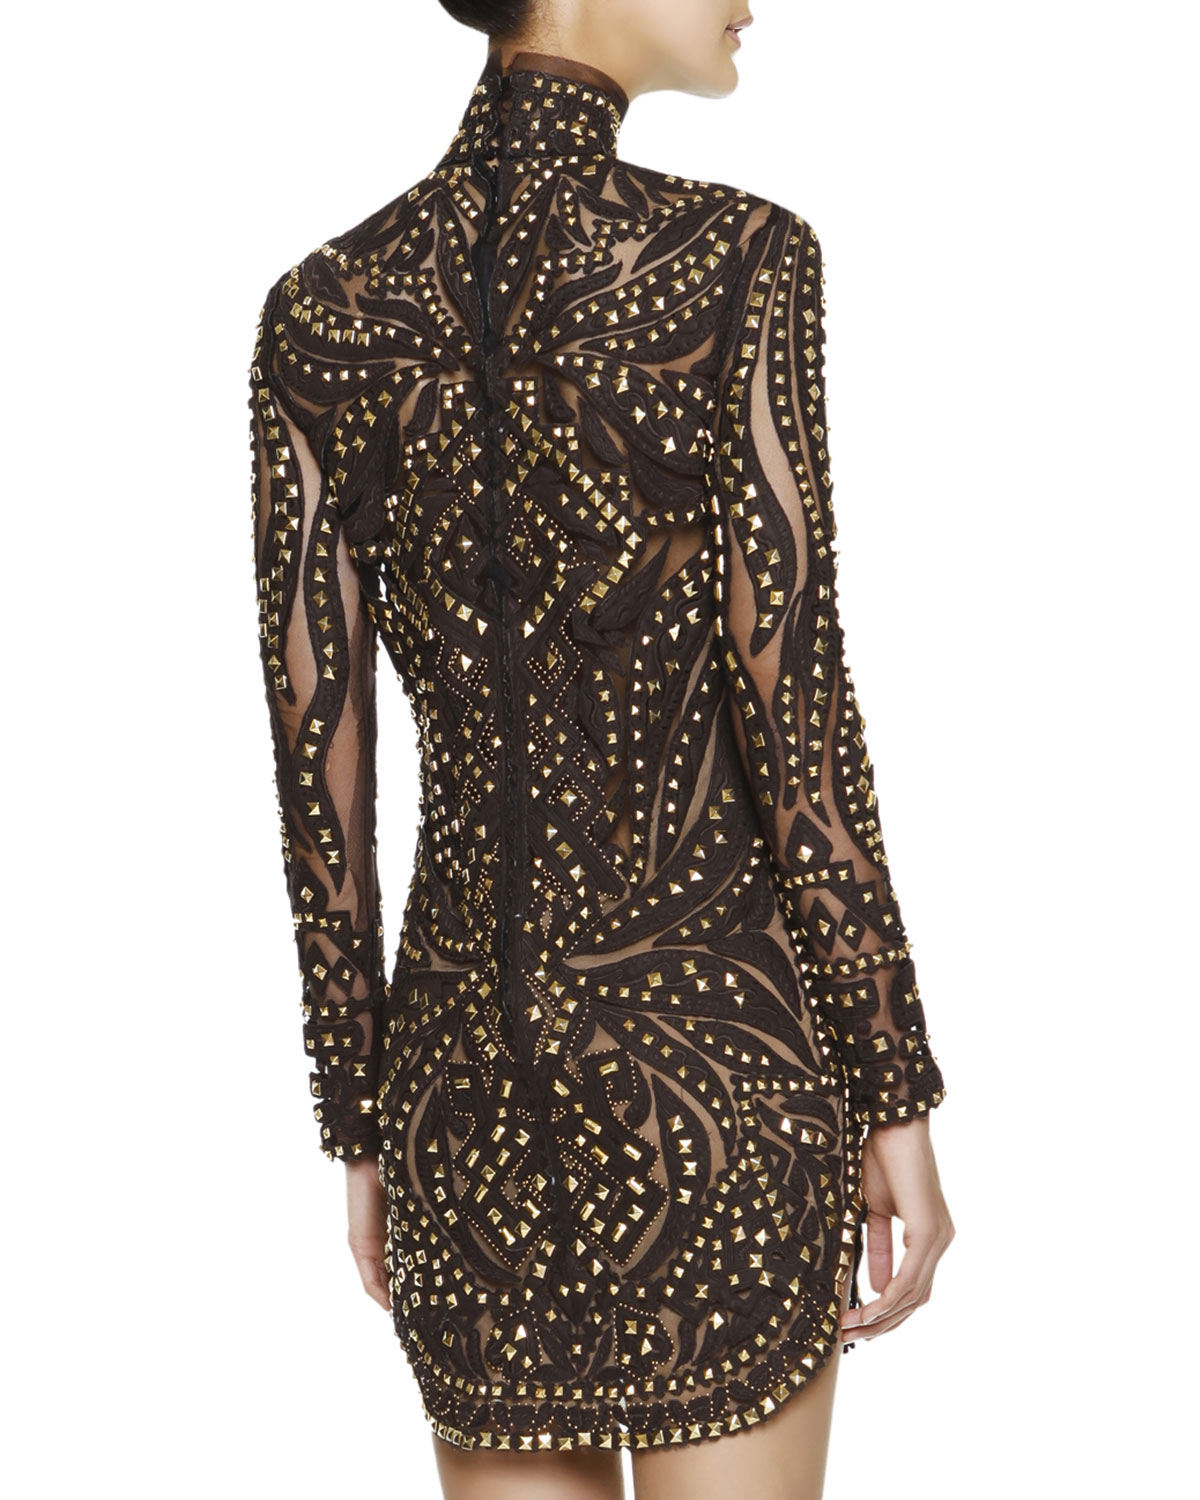 Emilio pucci Studded Leather & Lace Turtleneck Dress in Black | Lyst